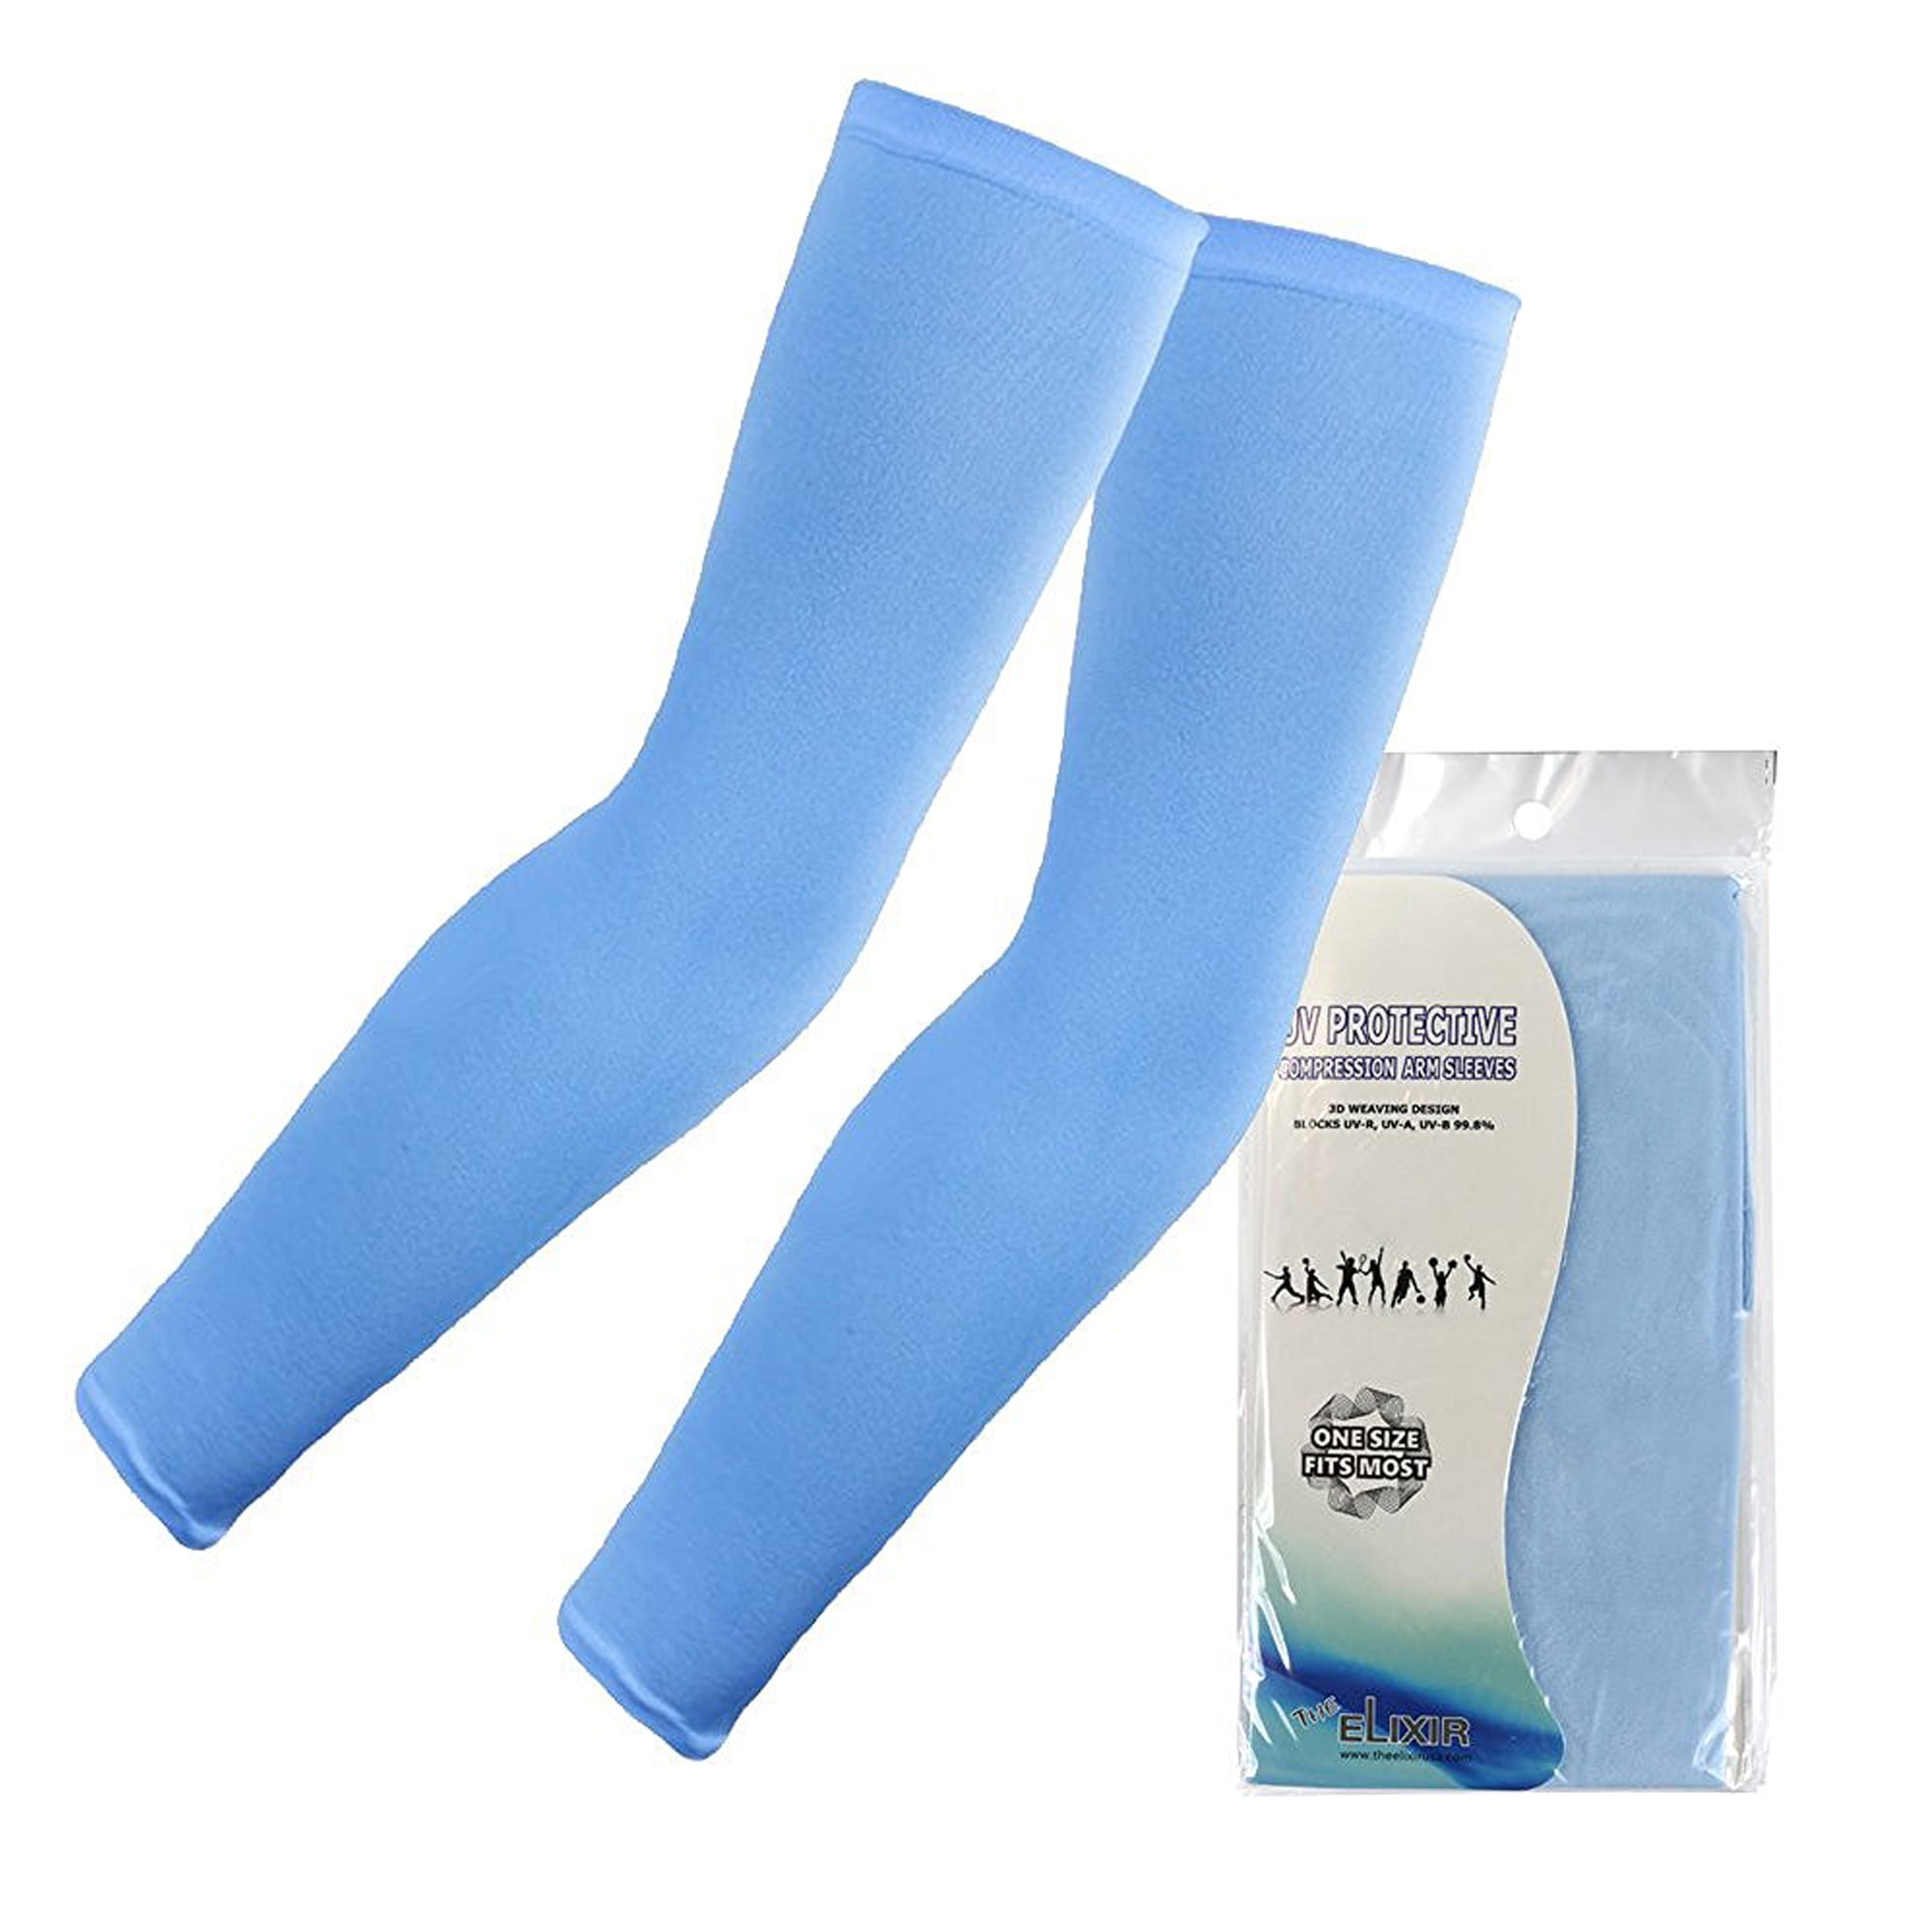 The Elixir Arm Compression Sleeves UV Protective - Forearm Sleeve